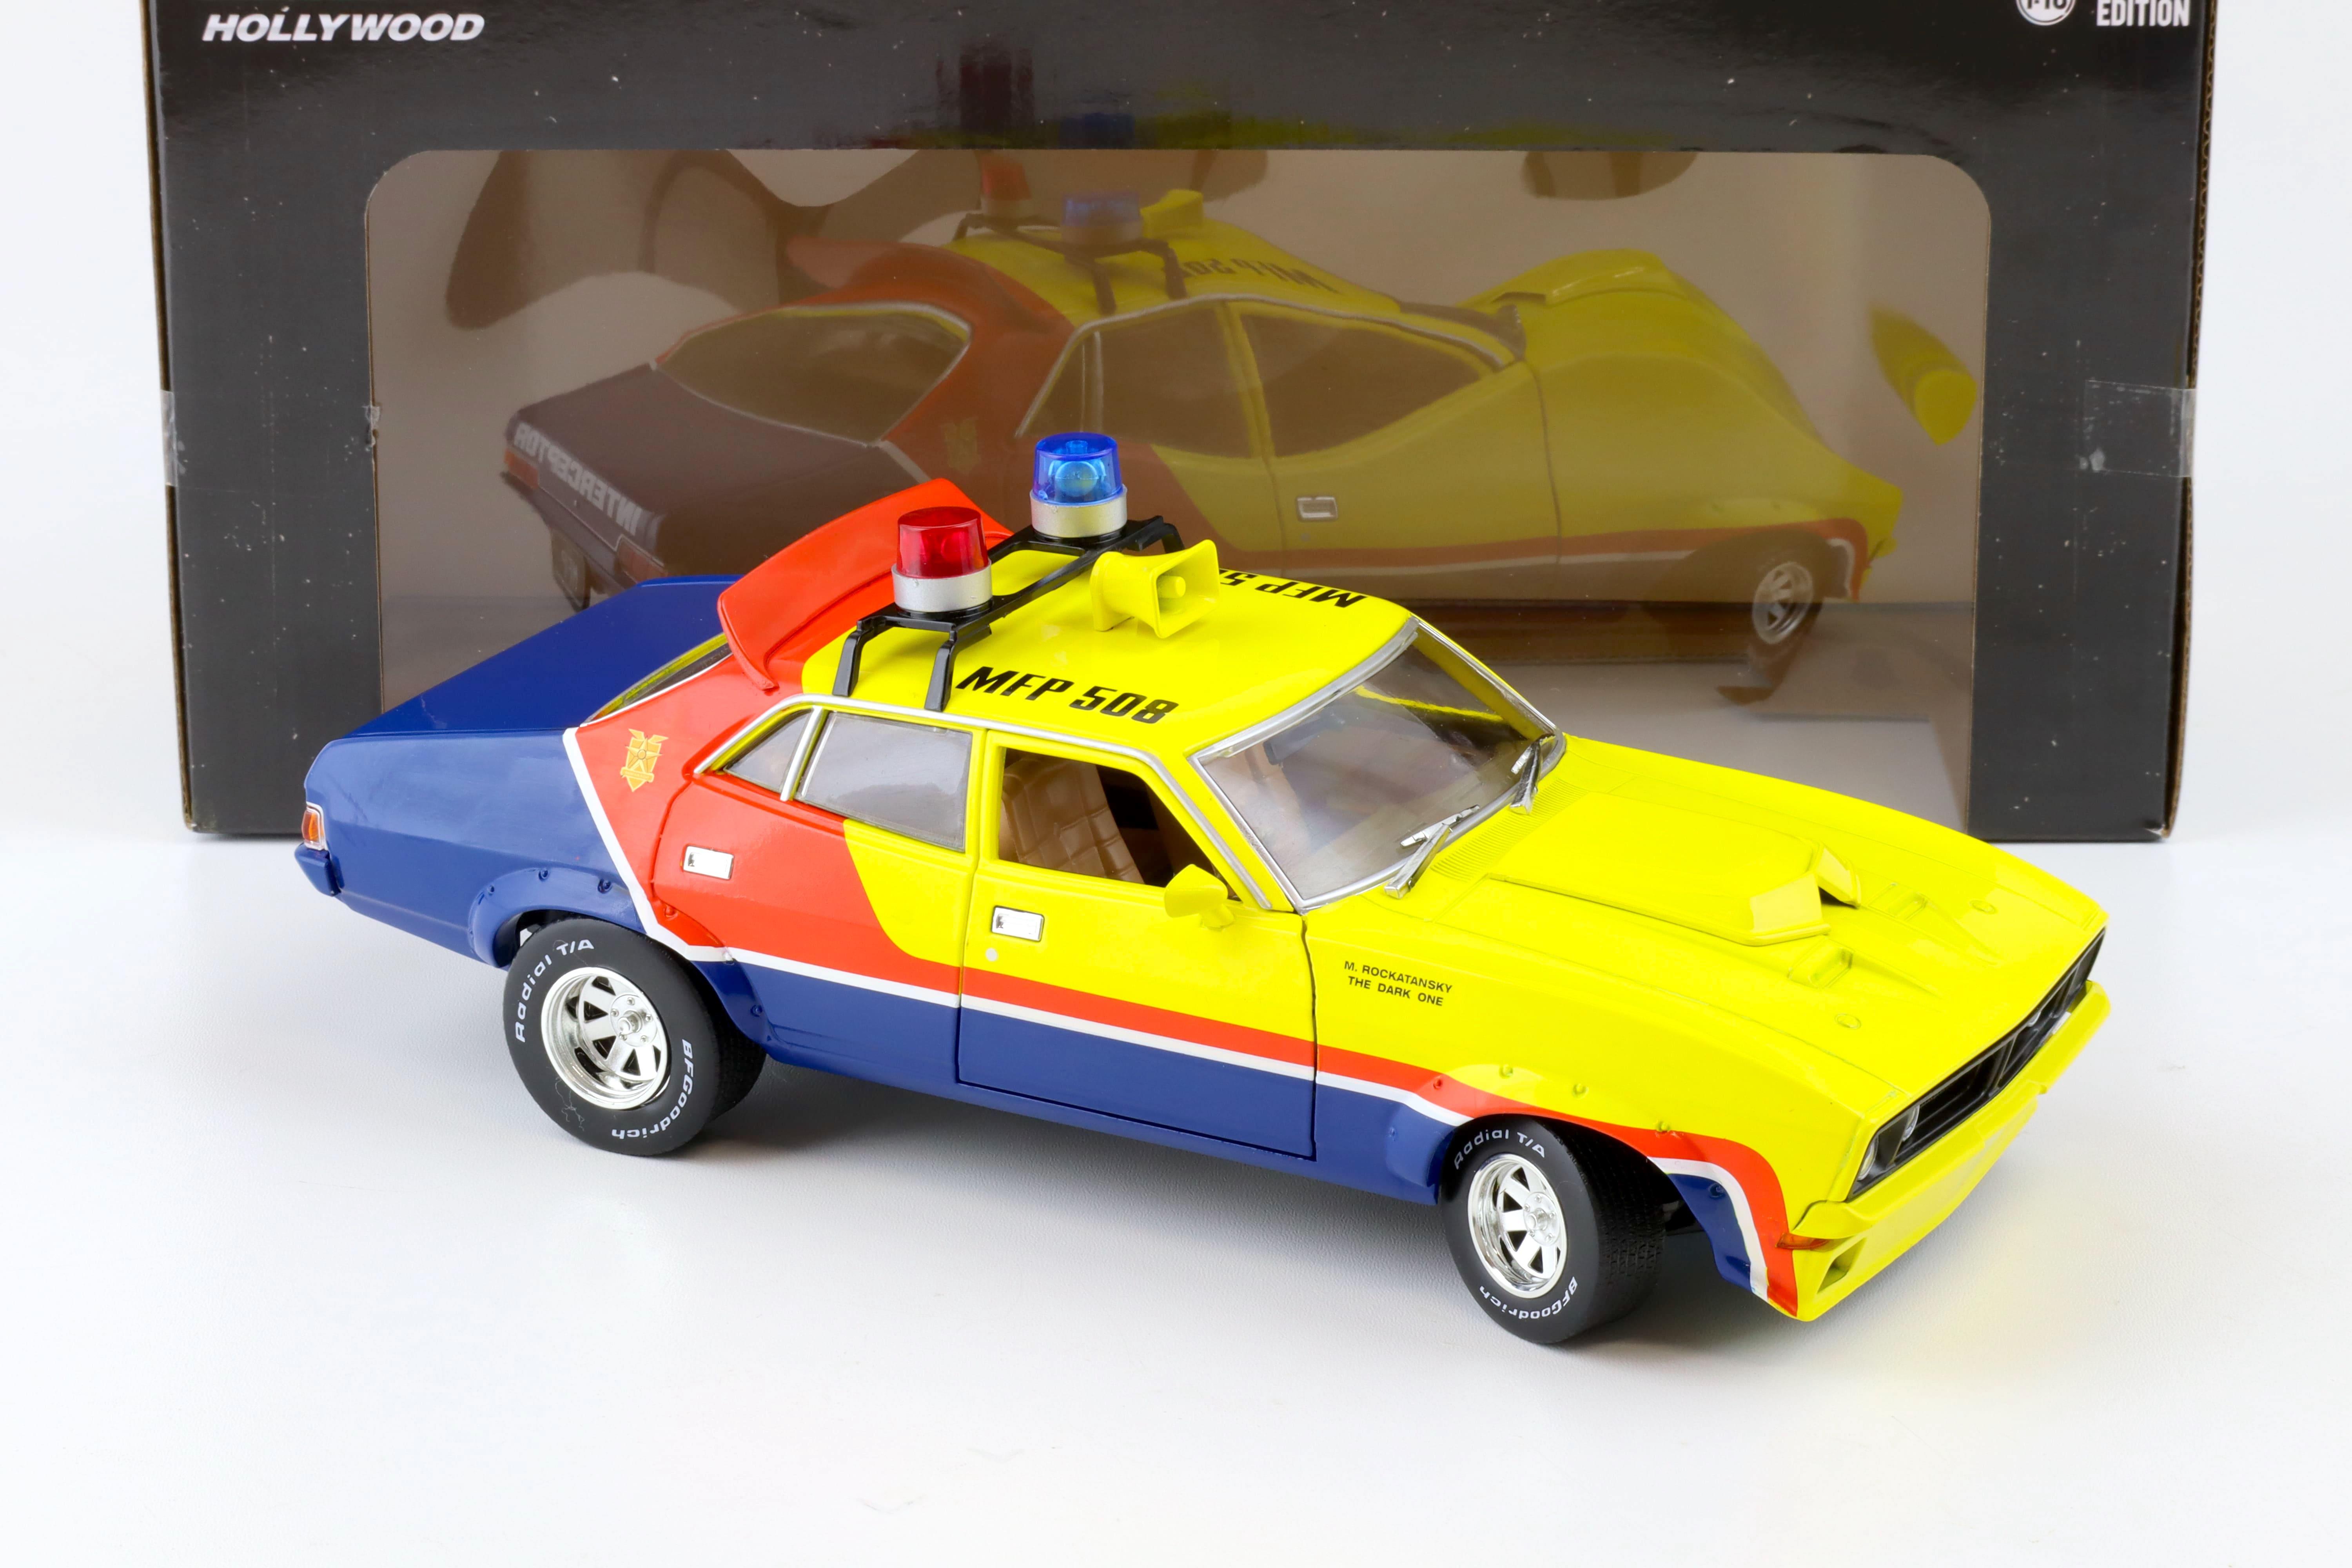 1:18 Greenlight Ford Falcon XB V8 Intercopter 1974 Police Car MAD MAX yellow/ red/ blue